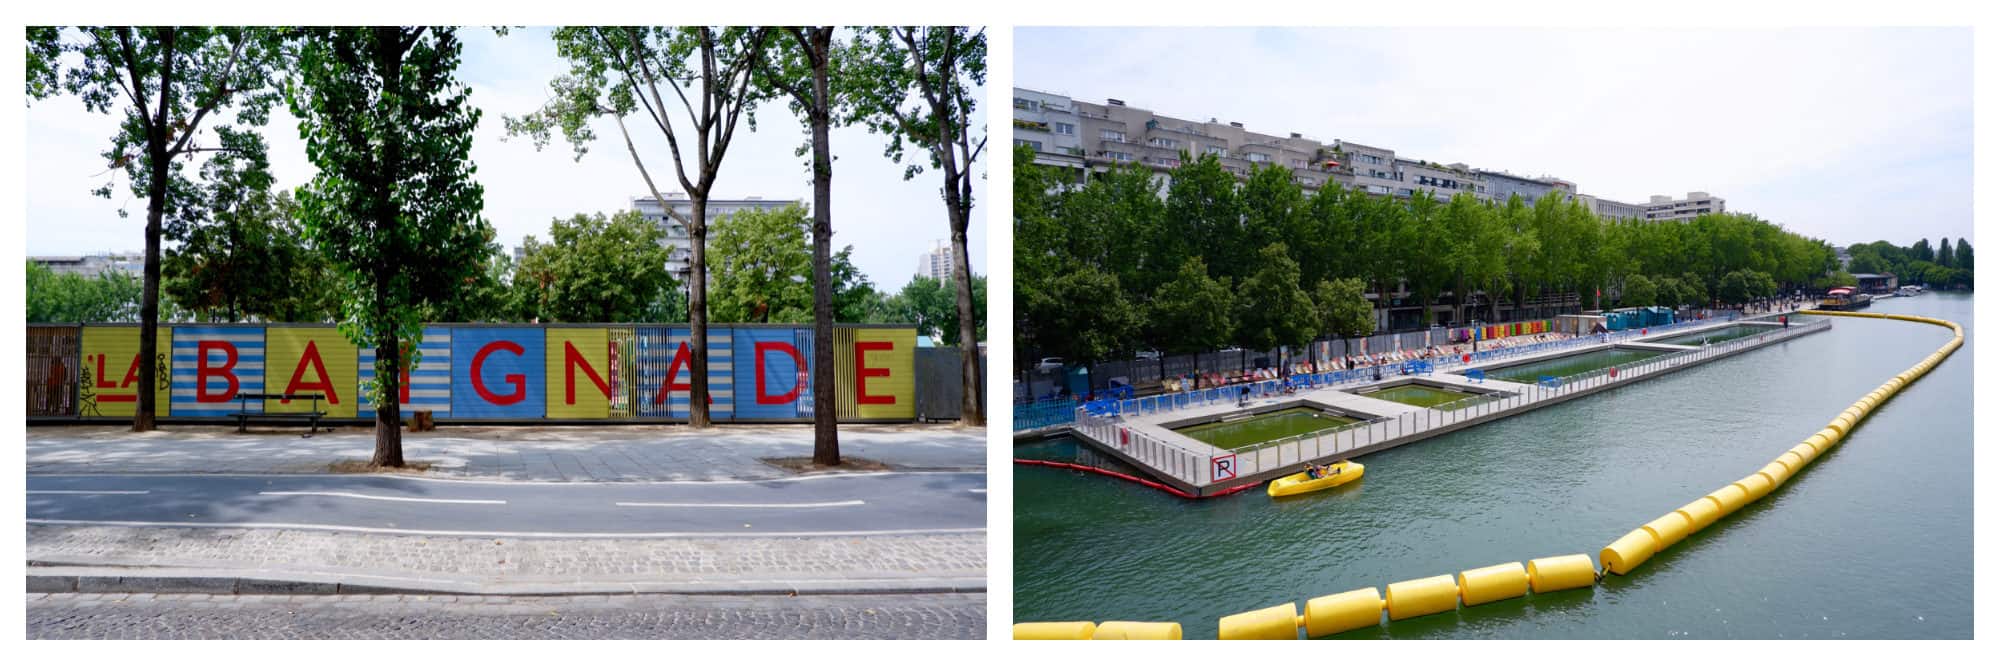 The words 'La Baignade' (bathing area) painted on the fence of Paris Plages on the Canal de l'Ourcq (left) and the canal pools where people can swim in summer (right).